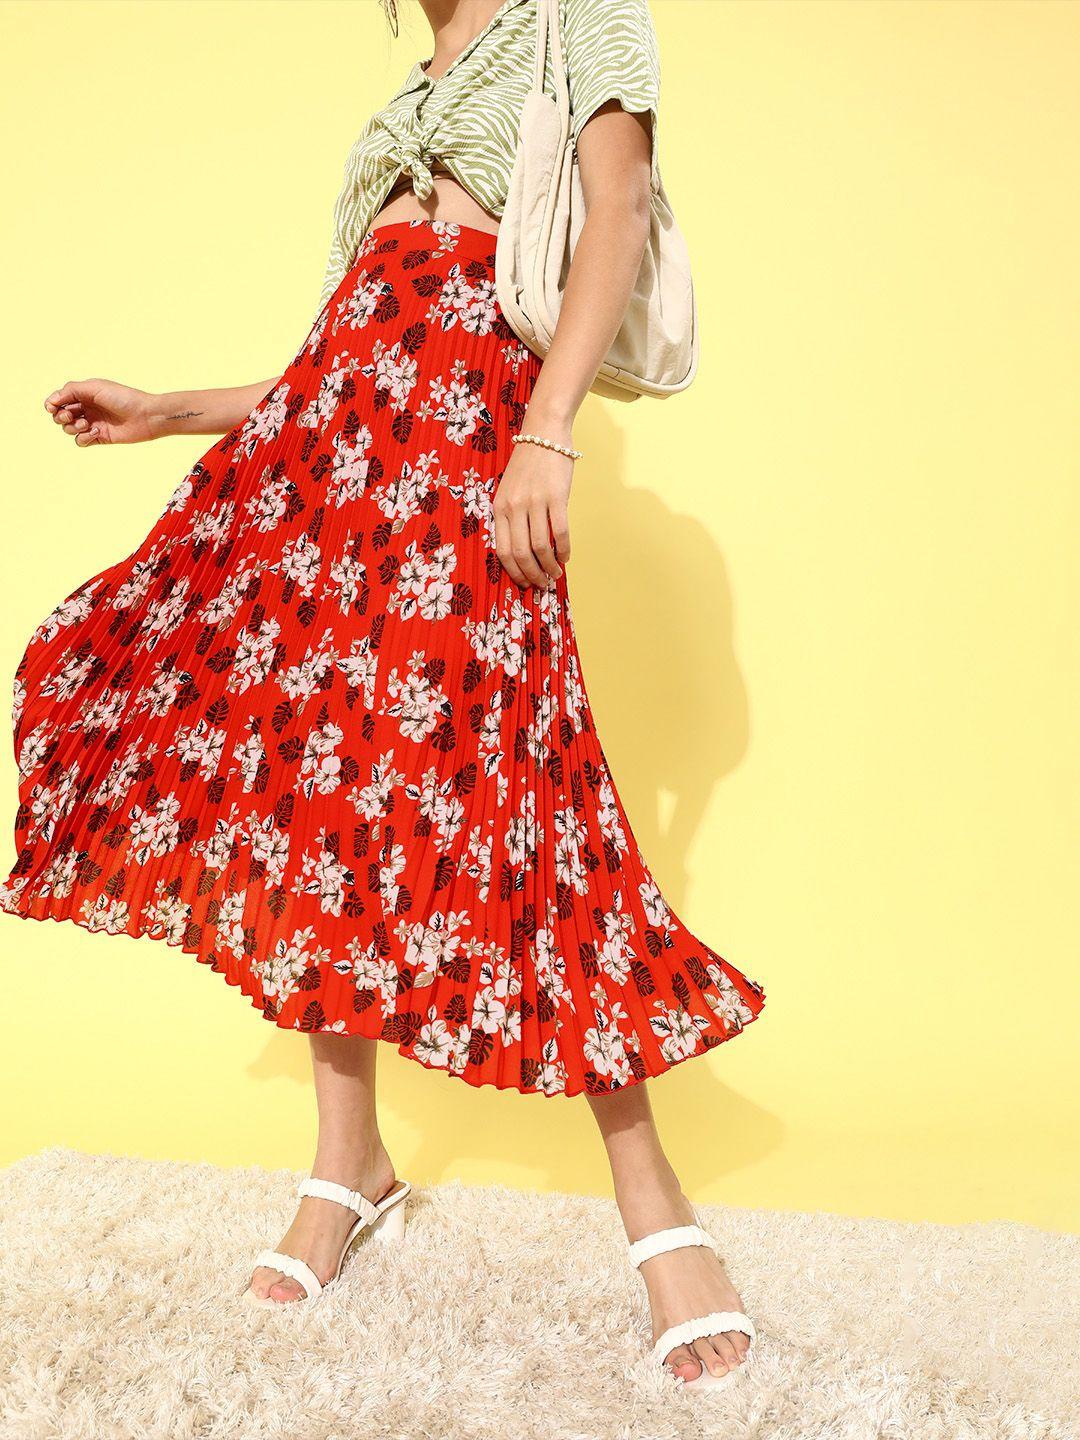 kassually women gorgeous red floral pleated form skirt